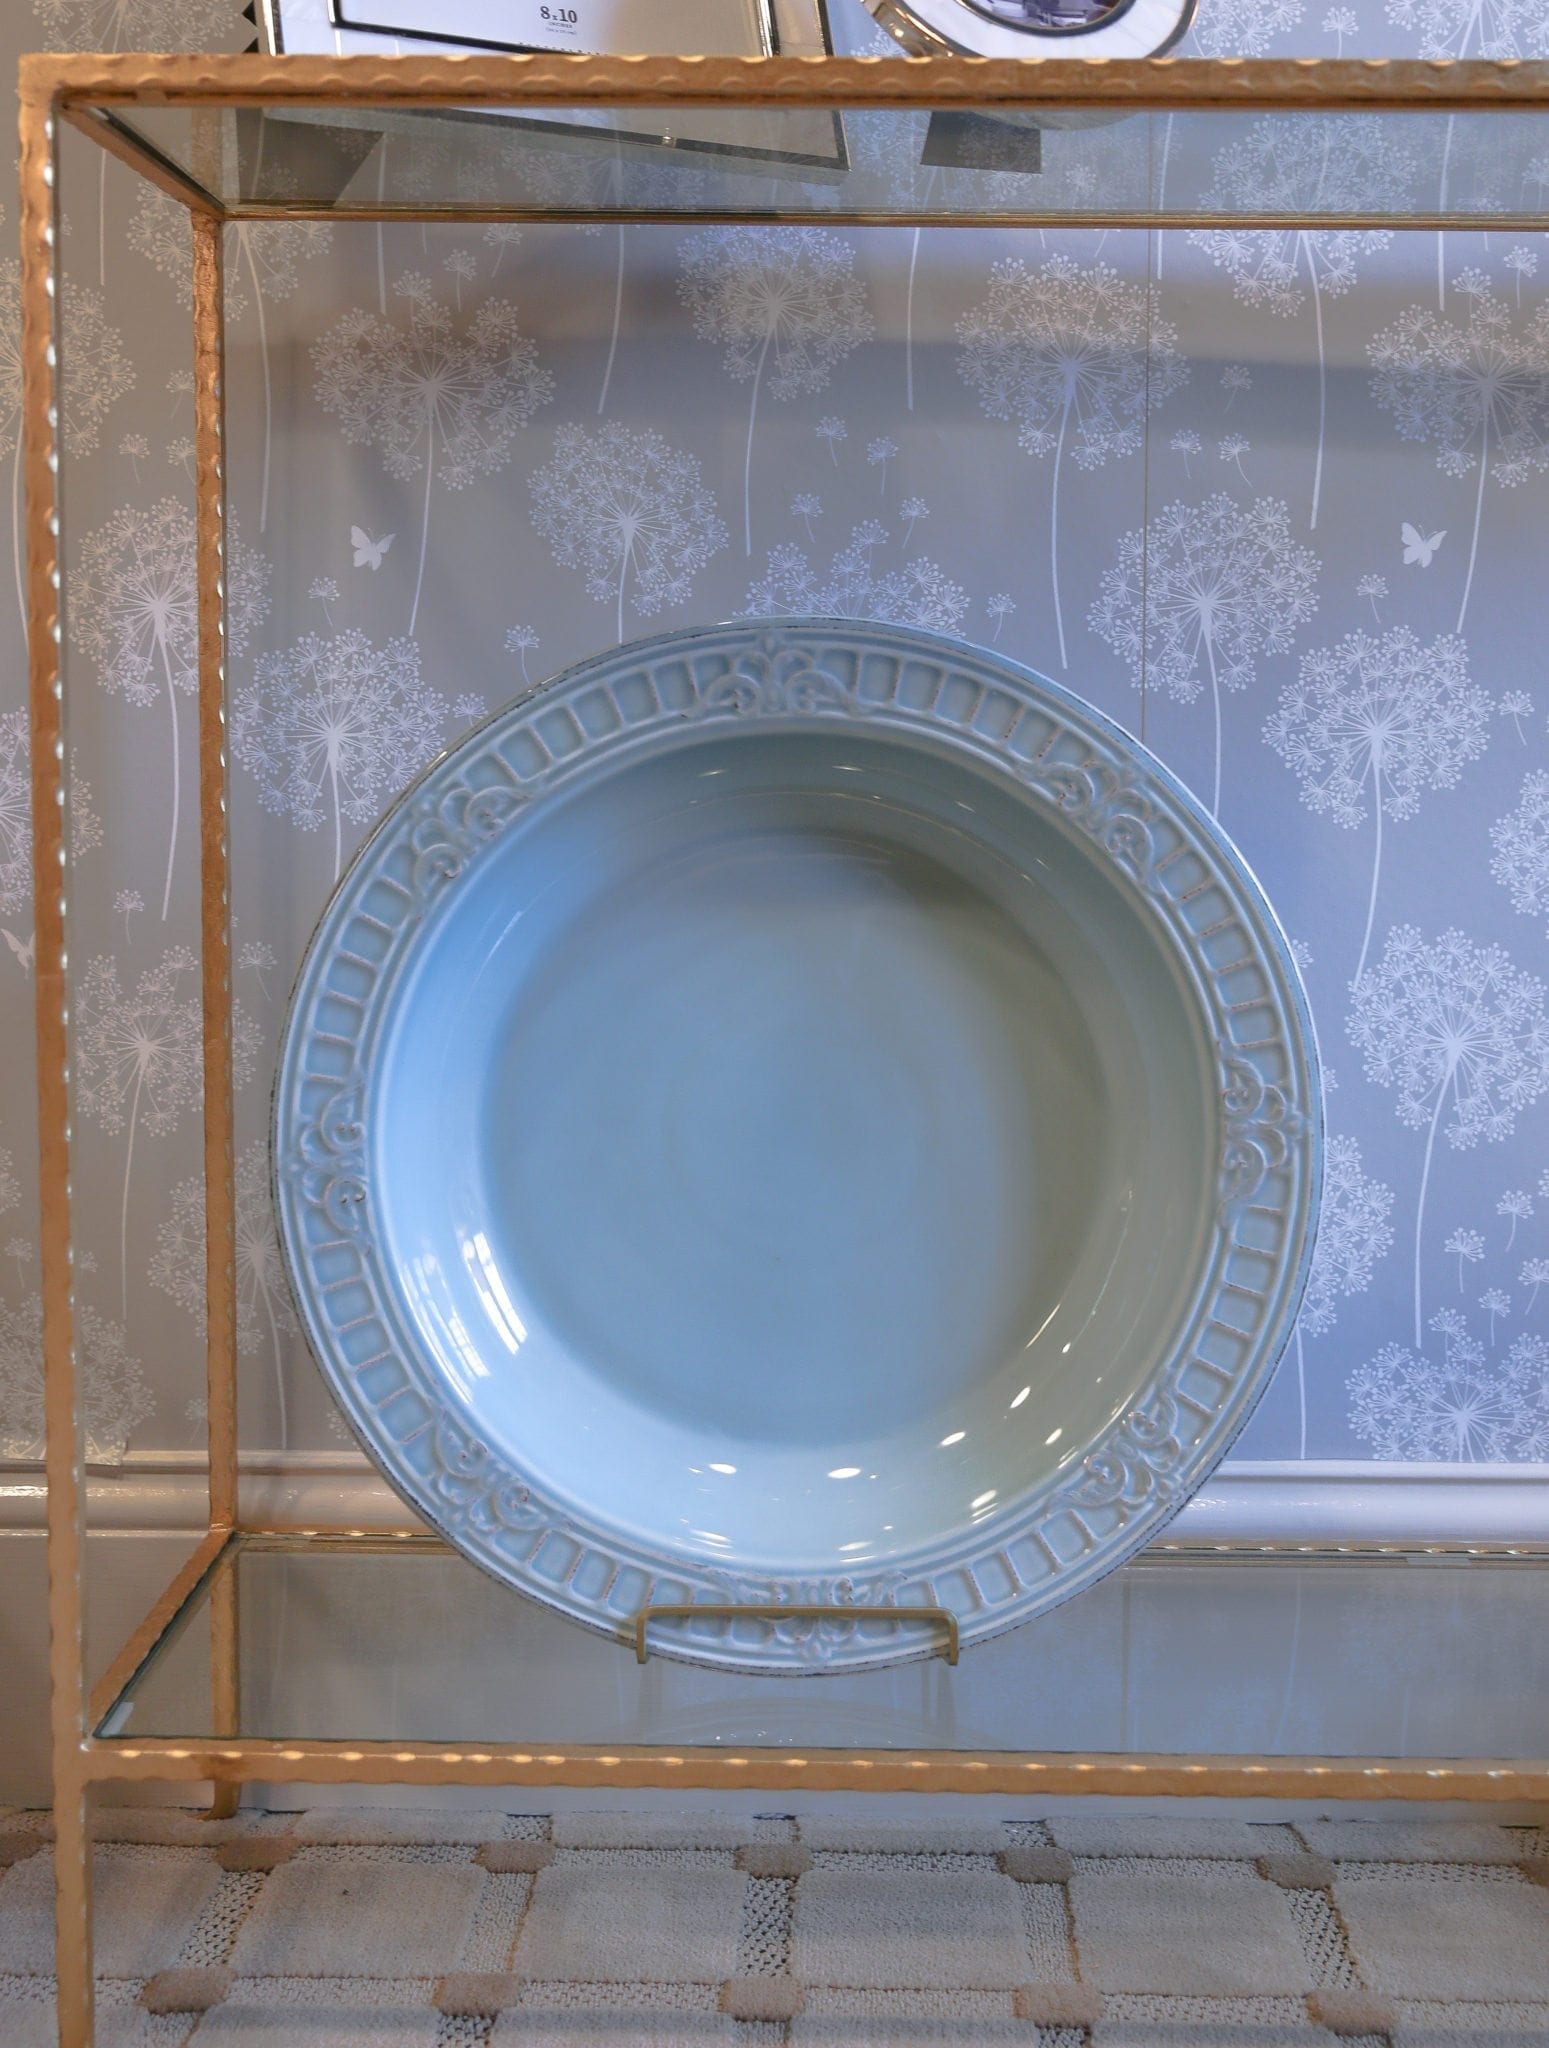 Decorative blue plate and gold console table.